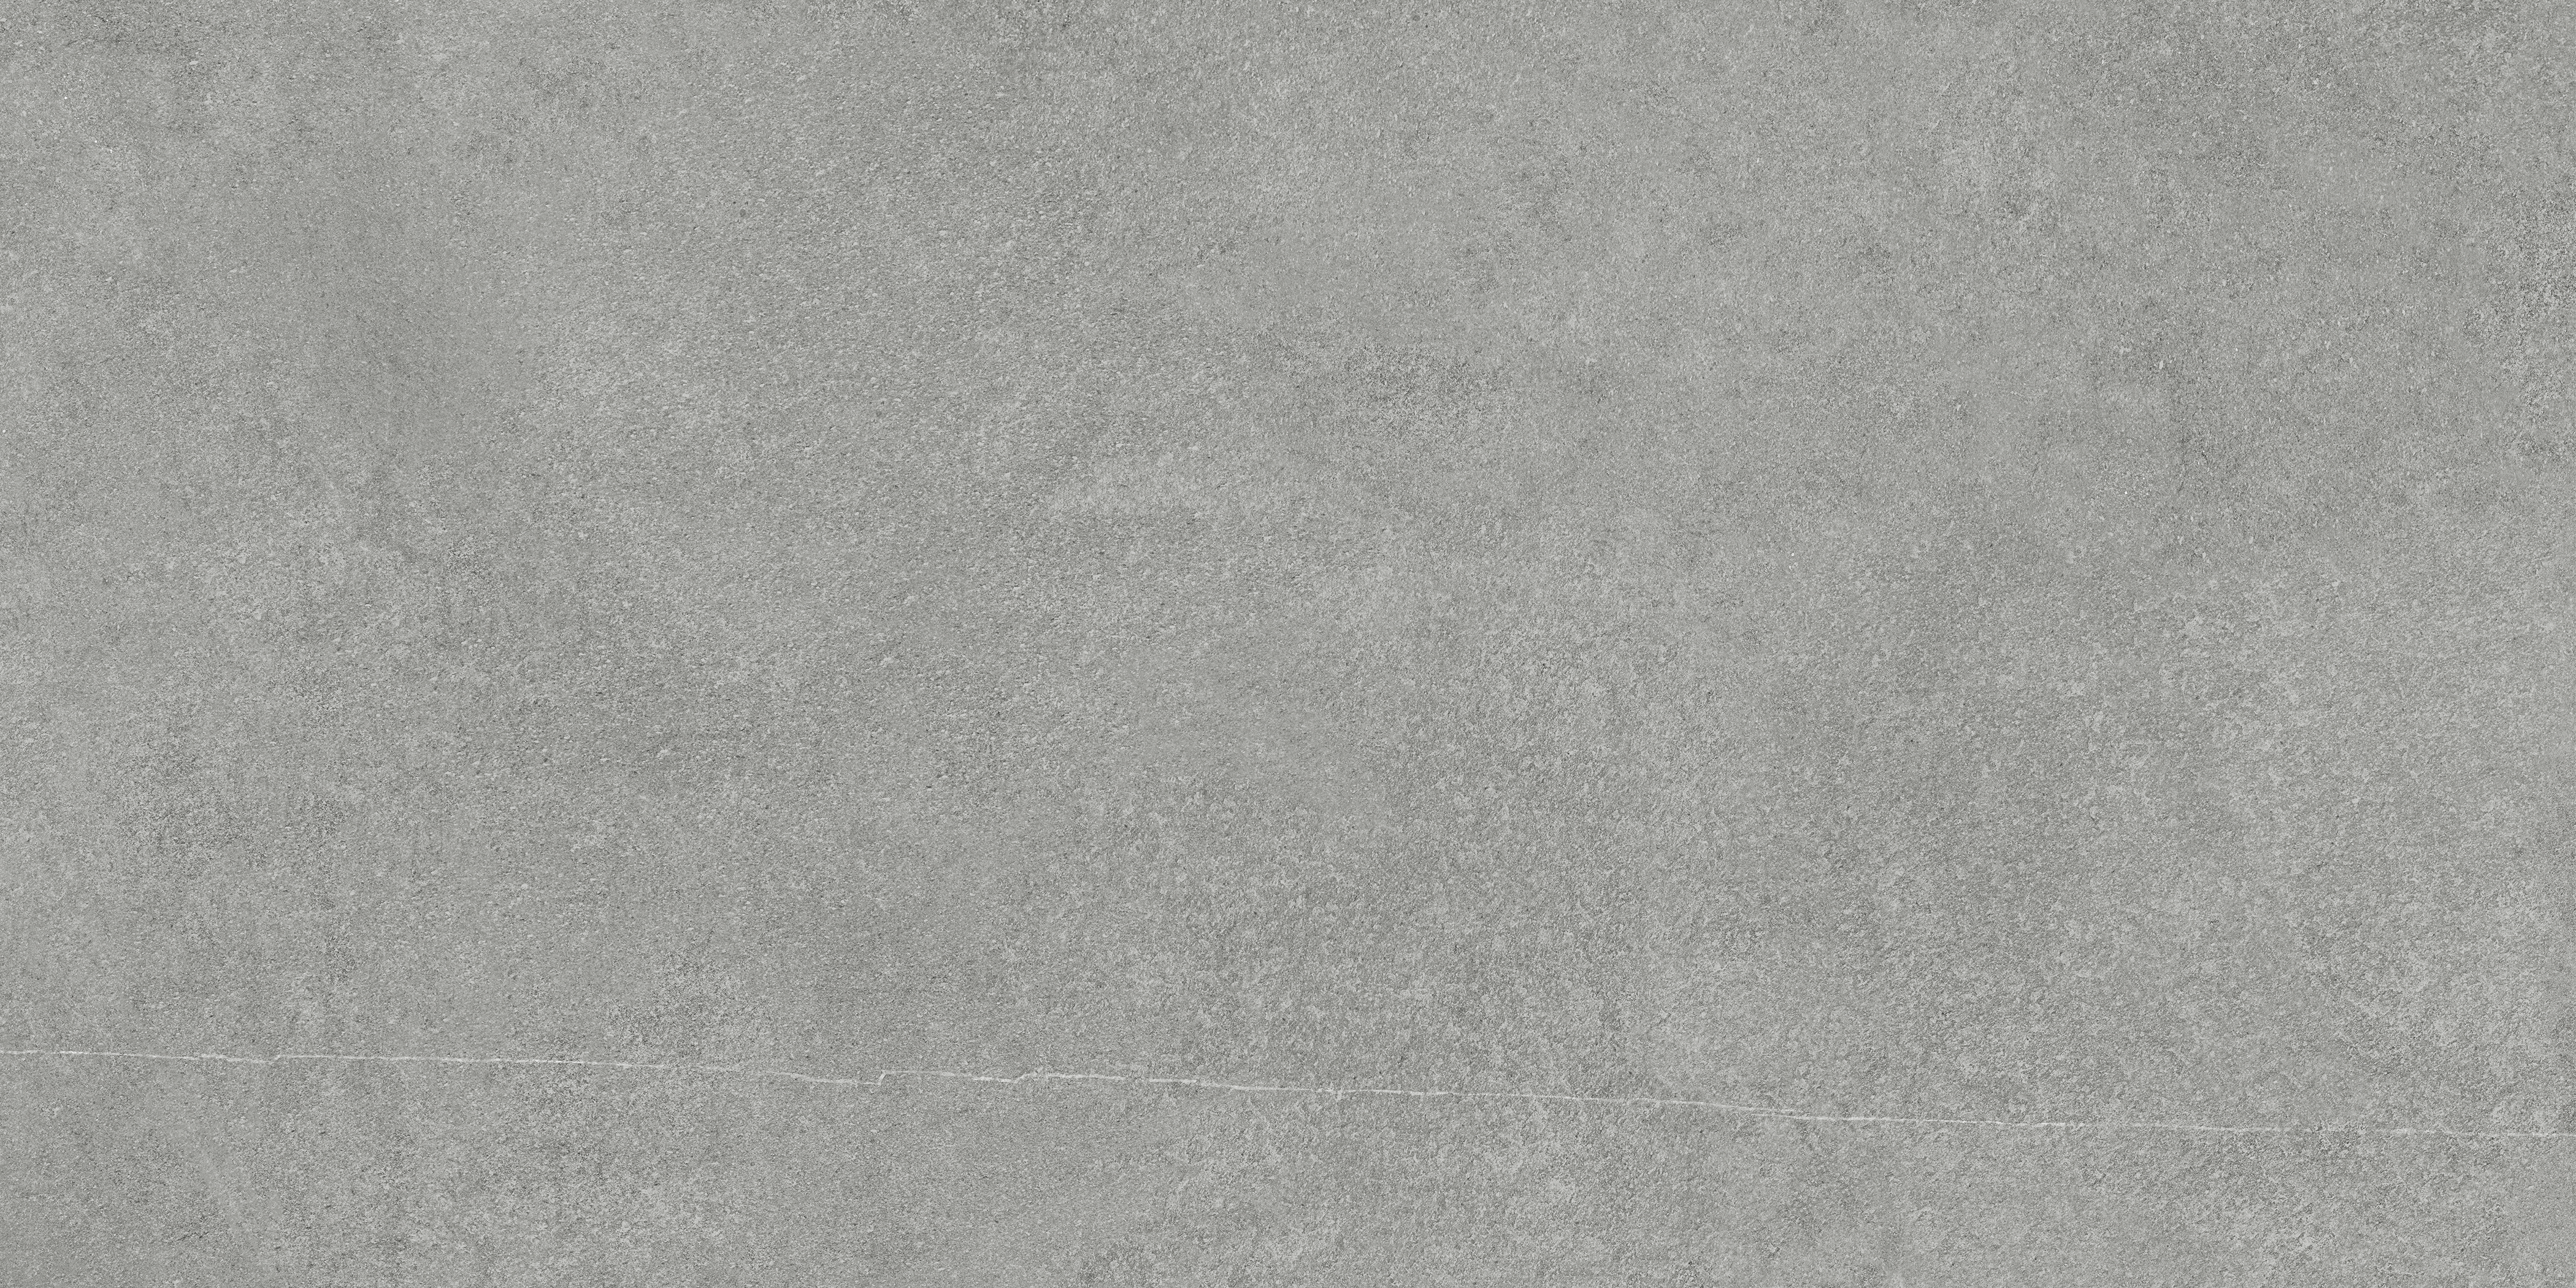 mica pattern color body porcelain field tile from mjork anatolia collection distributed by surface group international matte finish rectified edge 24x48 rectangle shape